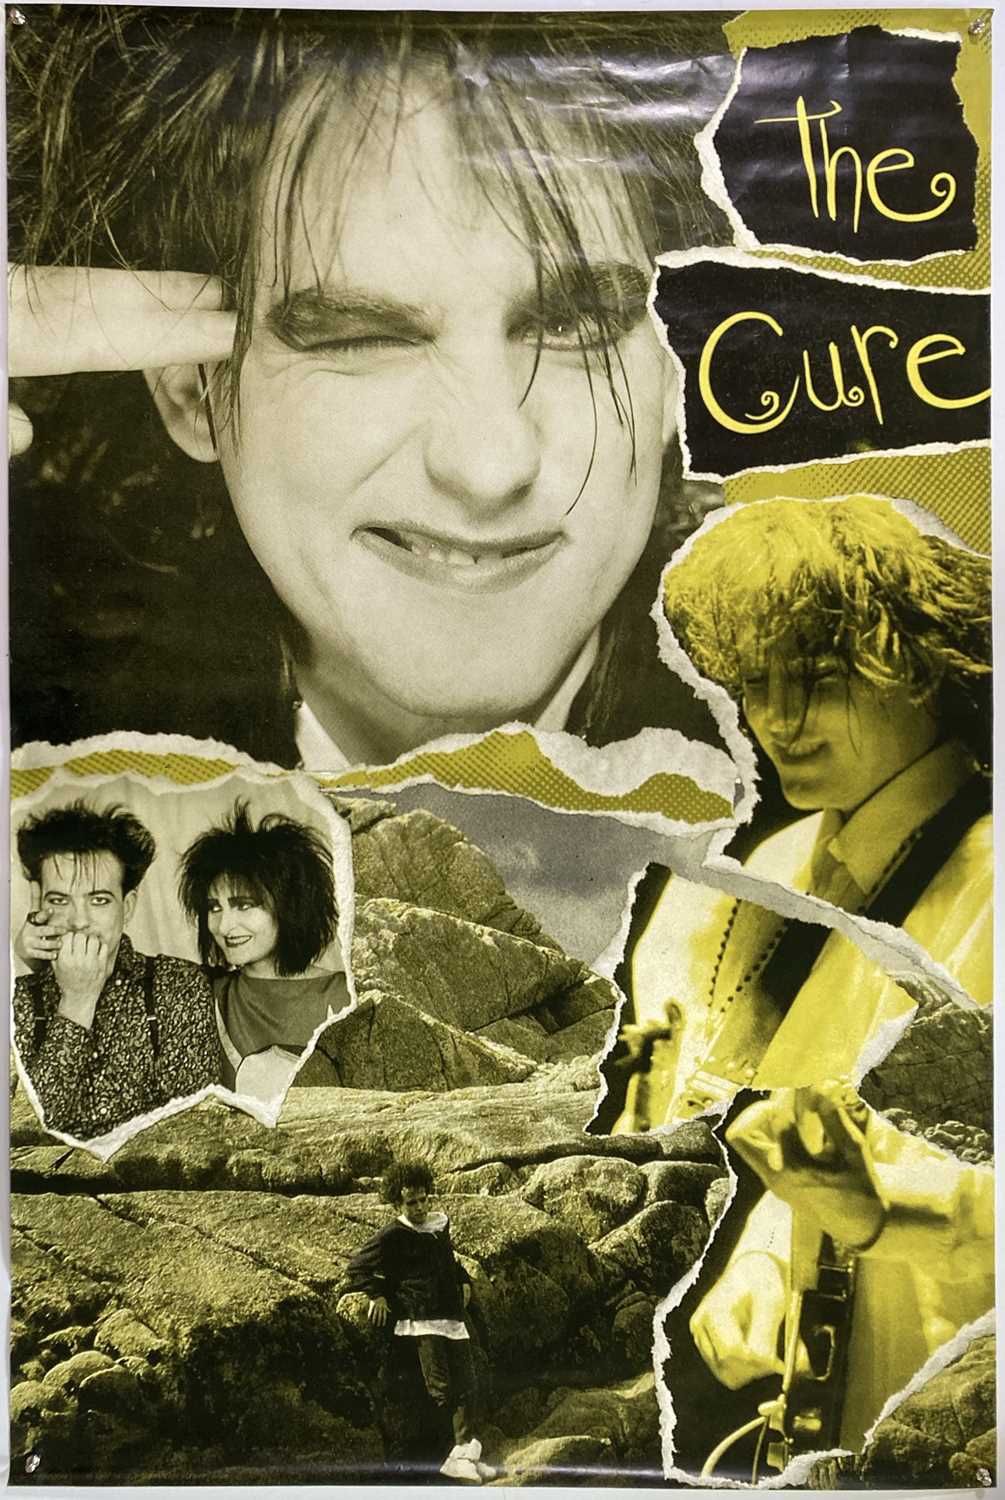 Lot 264 THE CURE POSTERS.